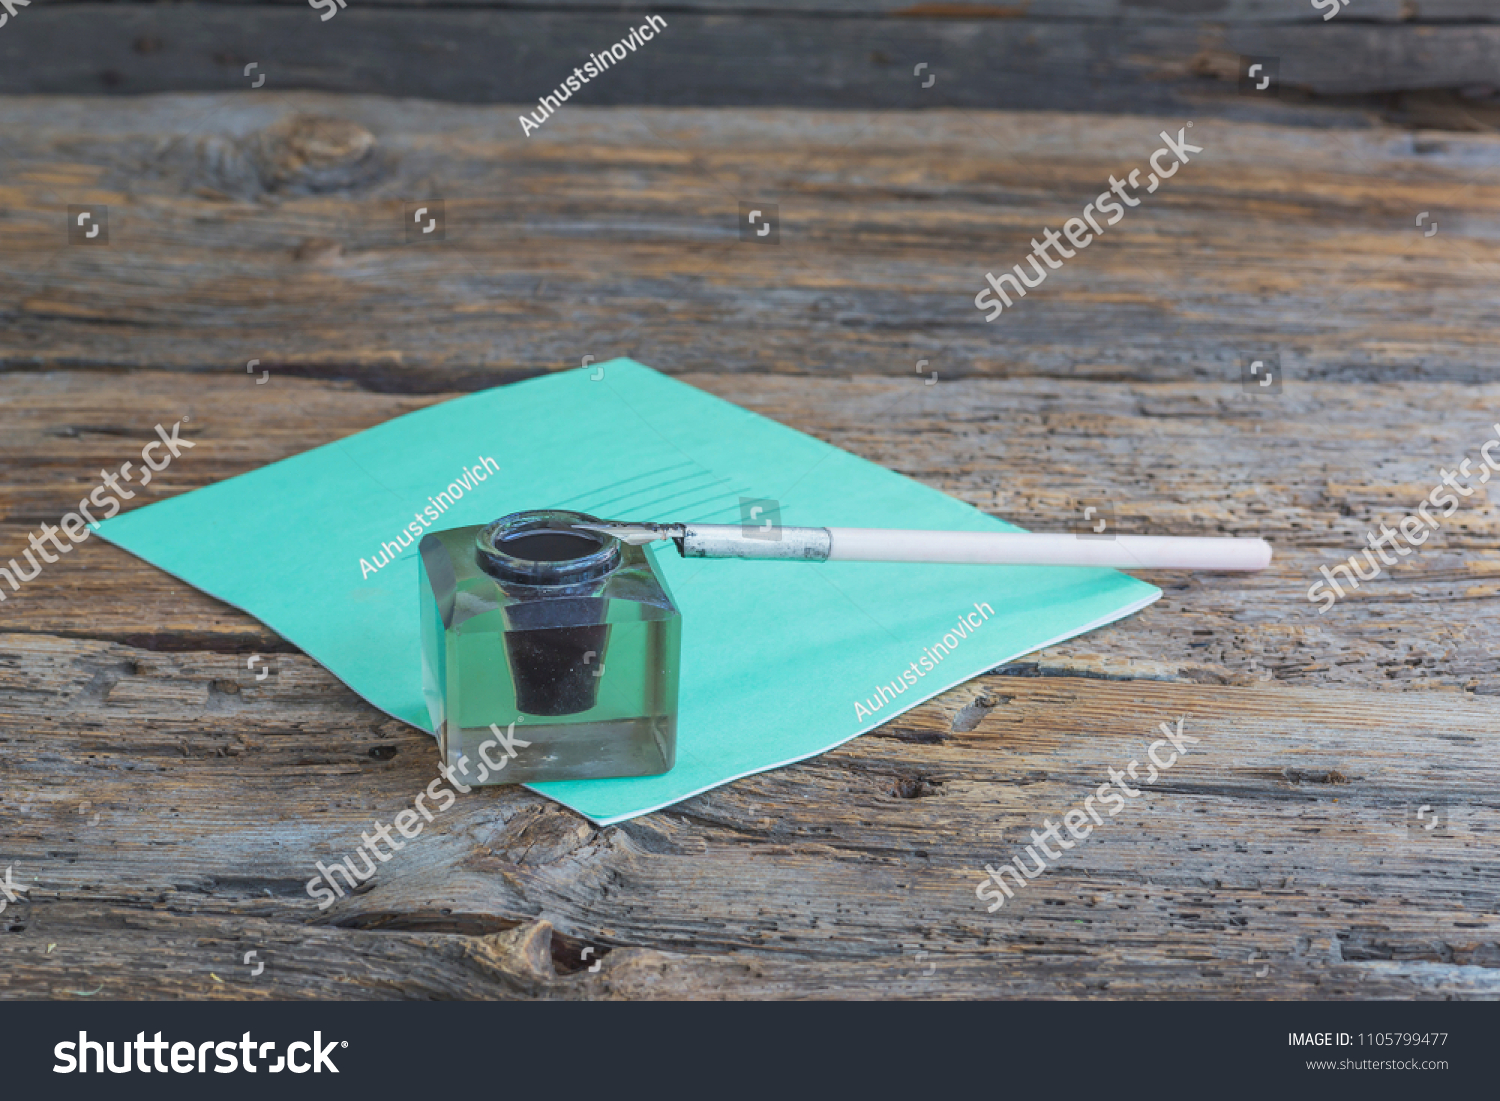 stock-photo-old-school-pen-and-inkwell-1